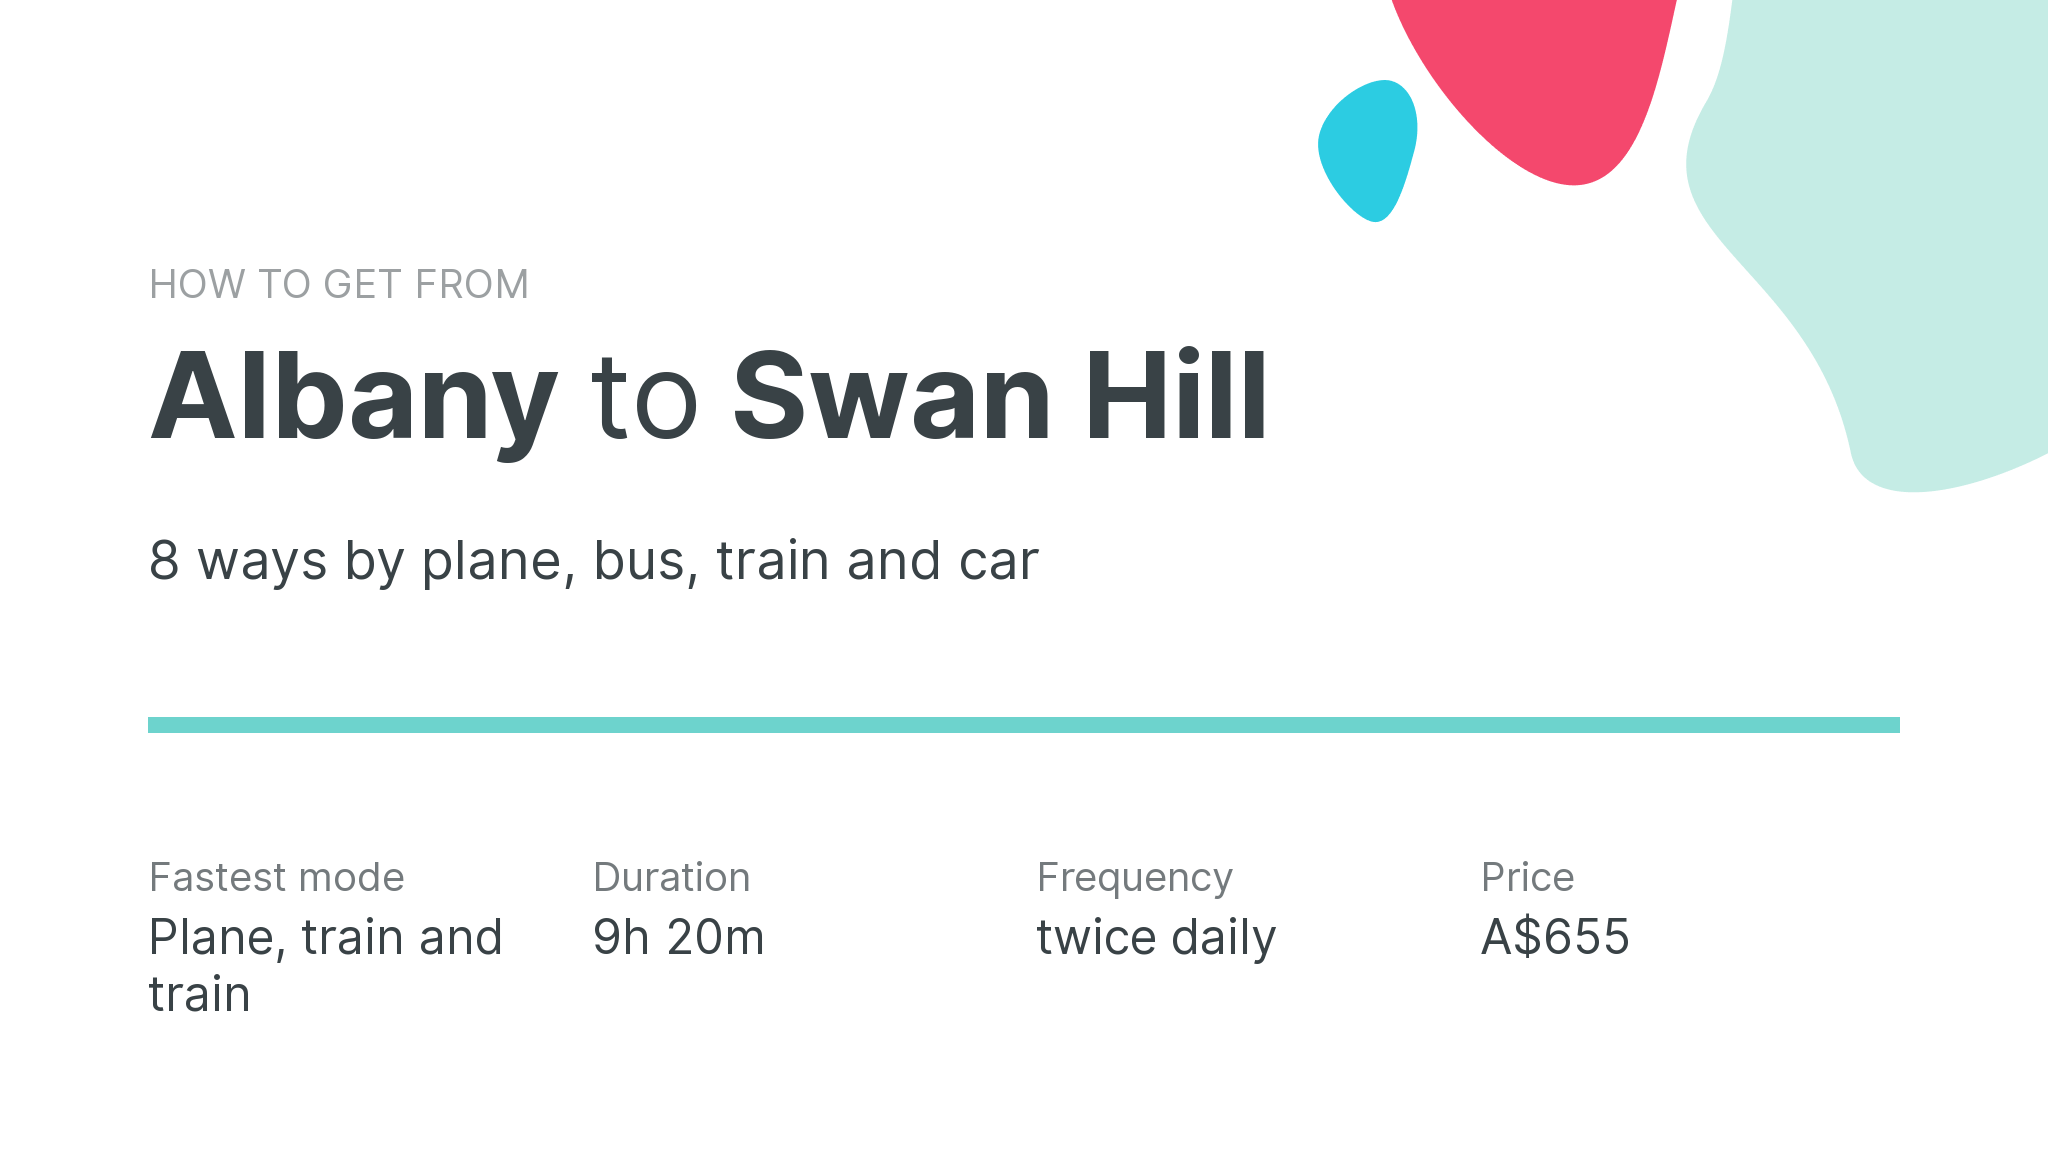 How do I get from Albany to Swan Hill